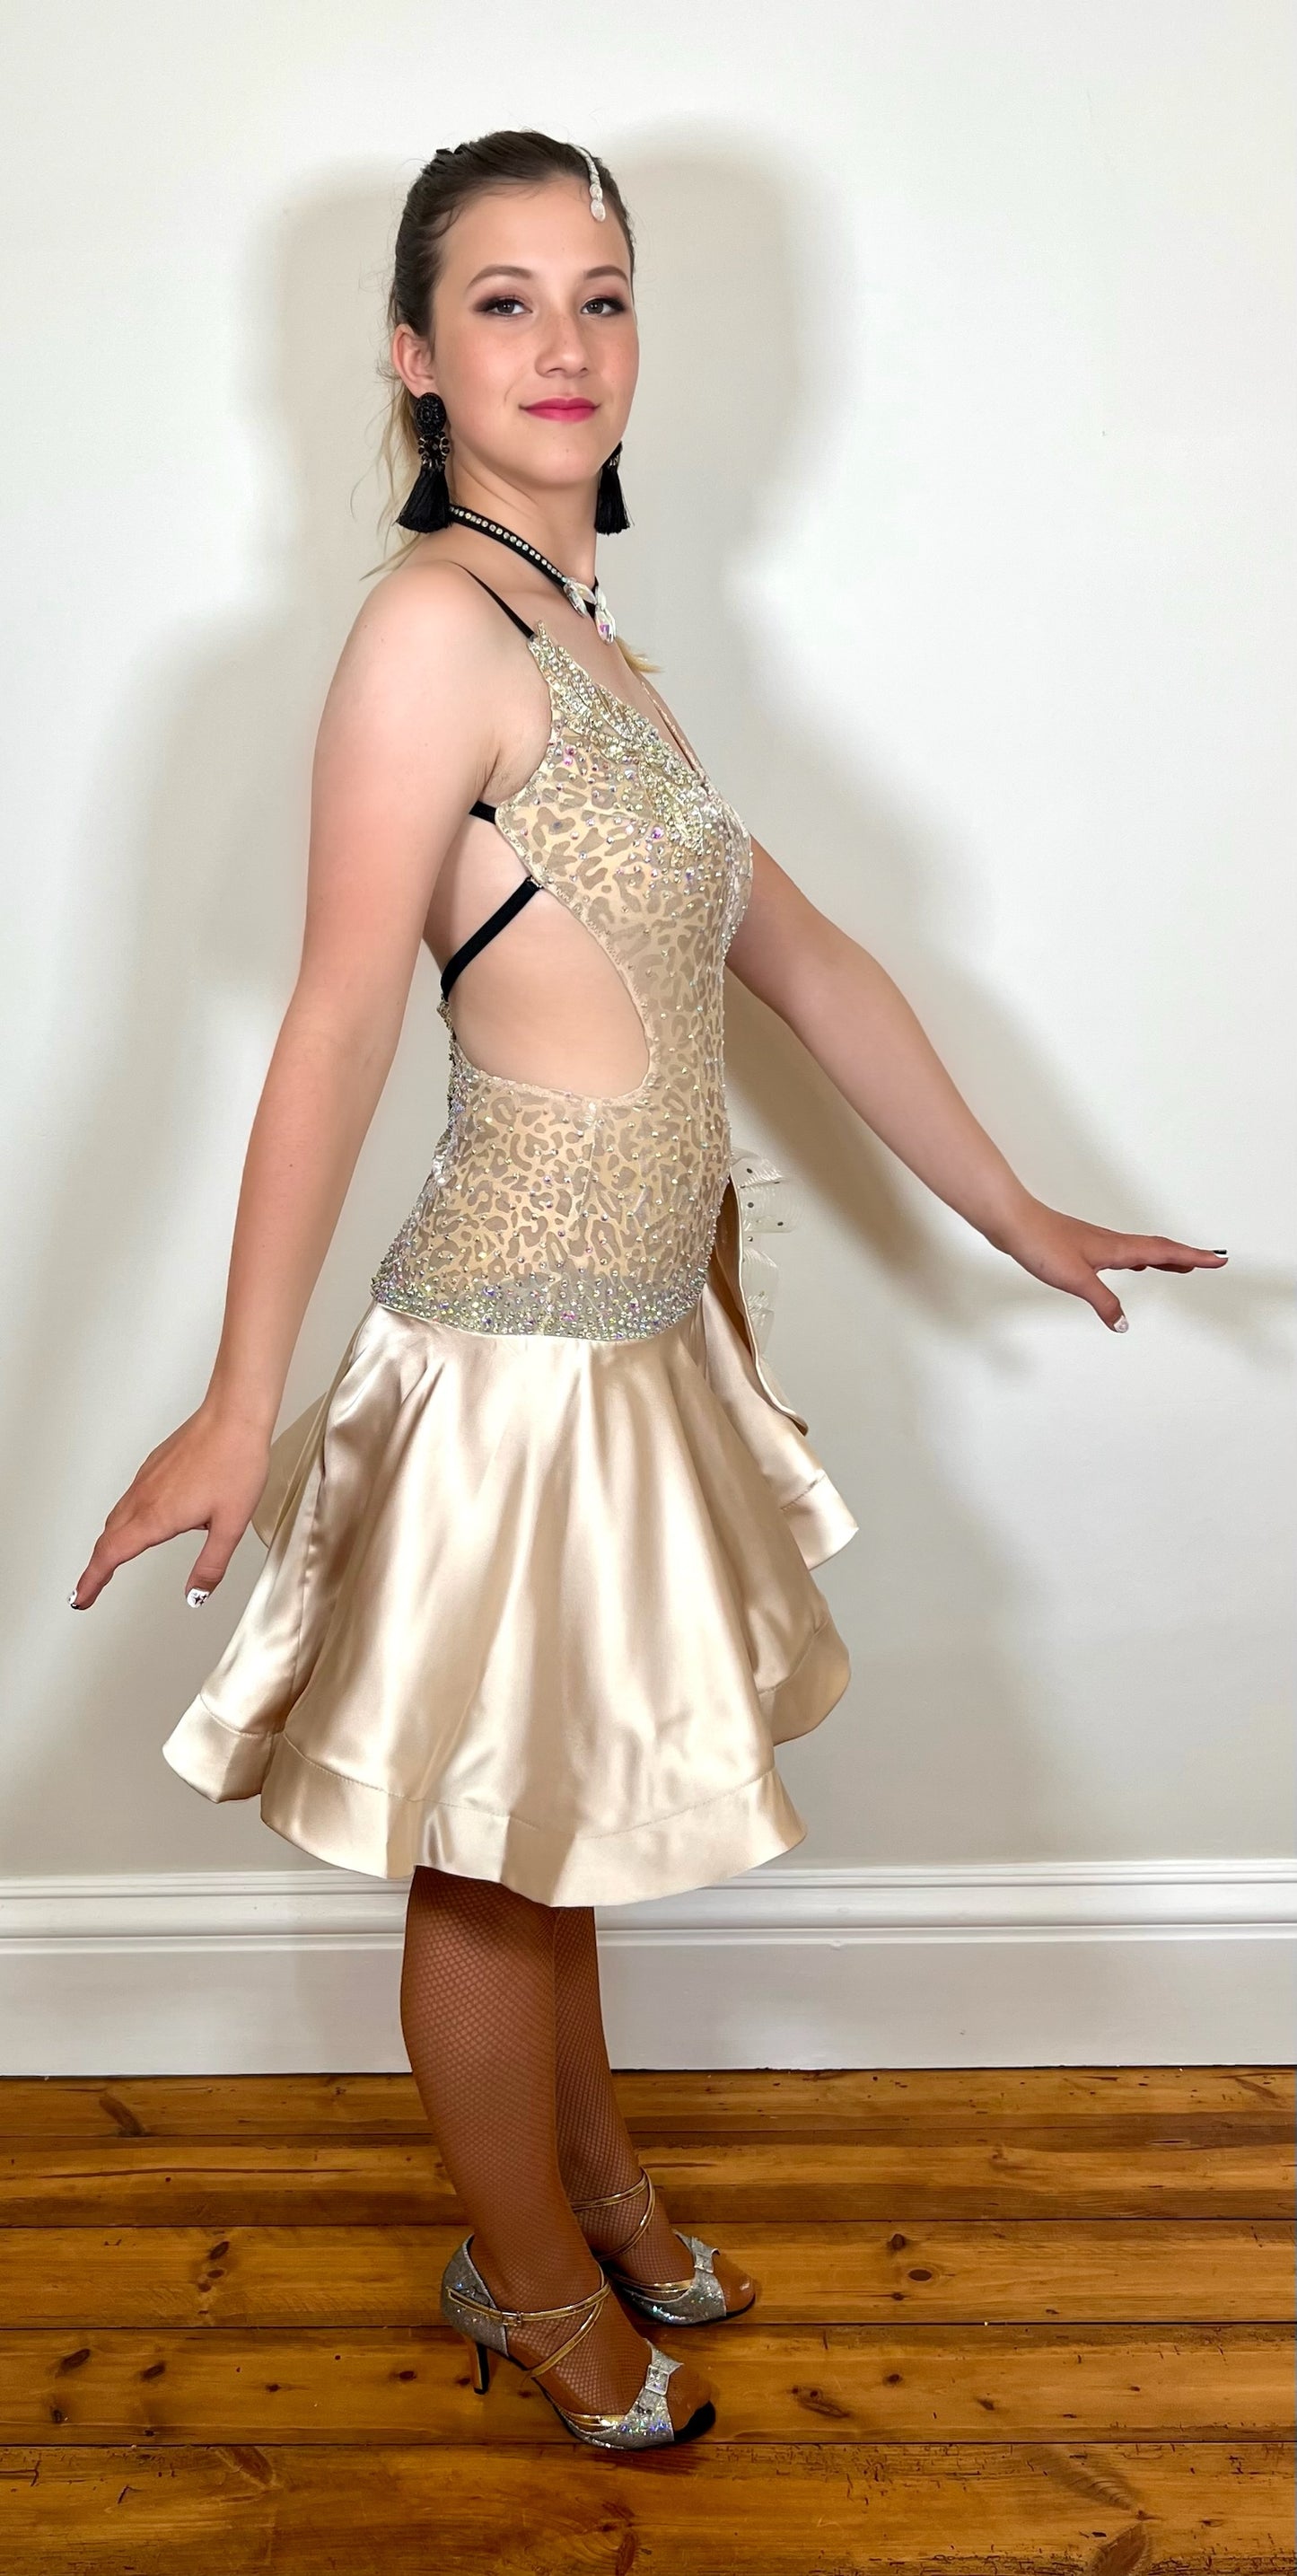 175 Champagne flesh Leopard fabric Latin dress. Soft satin skirt with motif detailing to one hip. Gold appliqué with AB stones